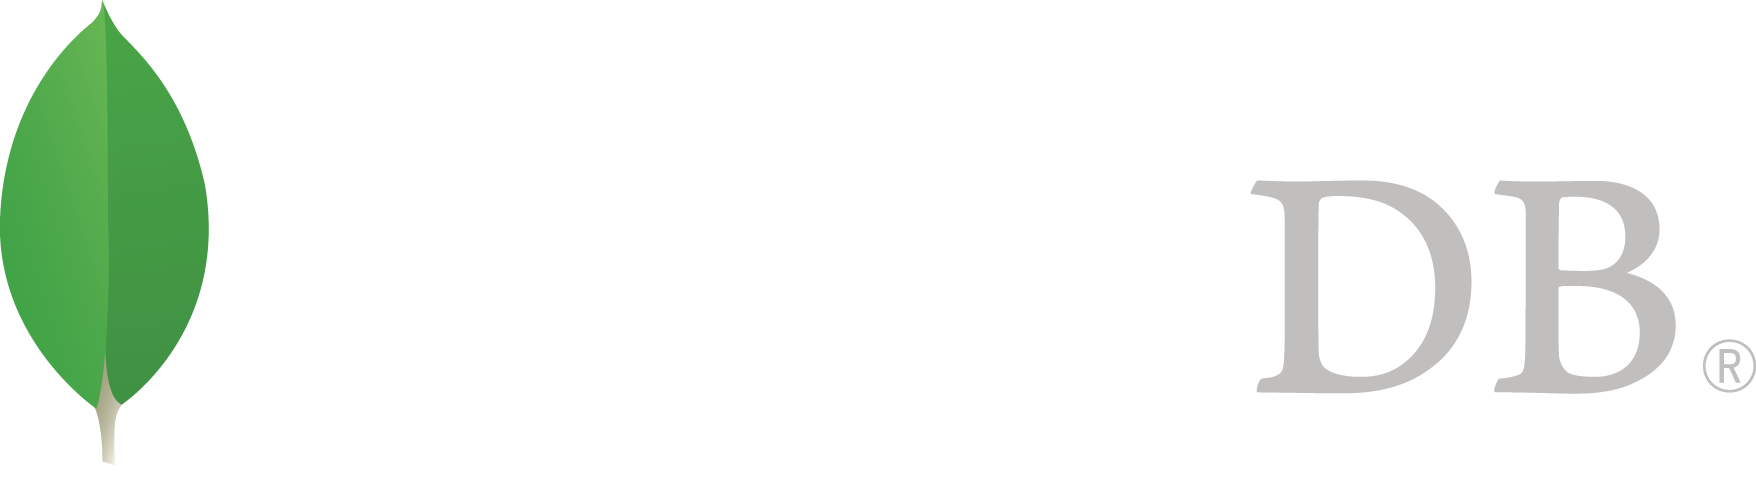 MongoDB is one of several dat